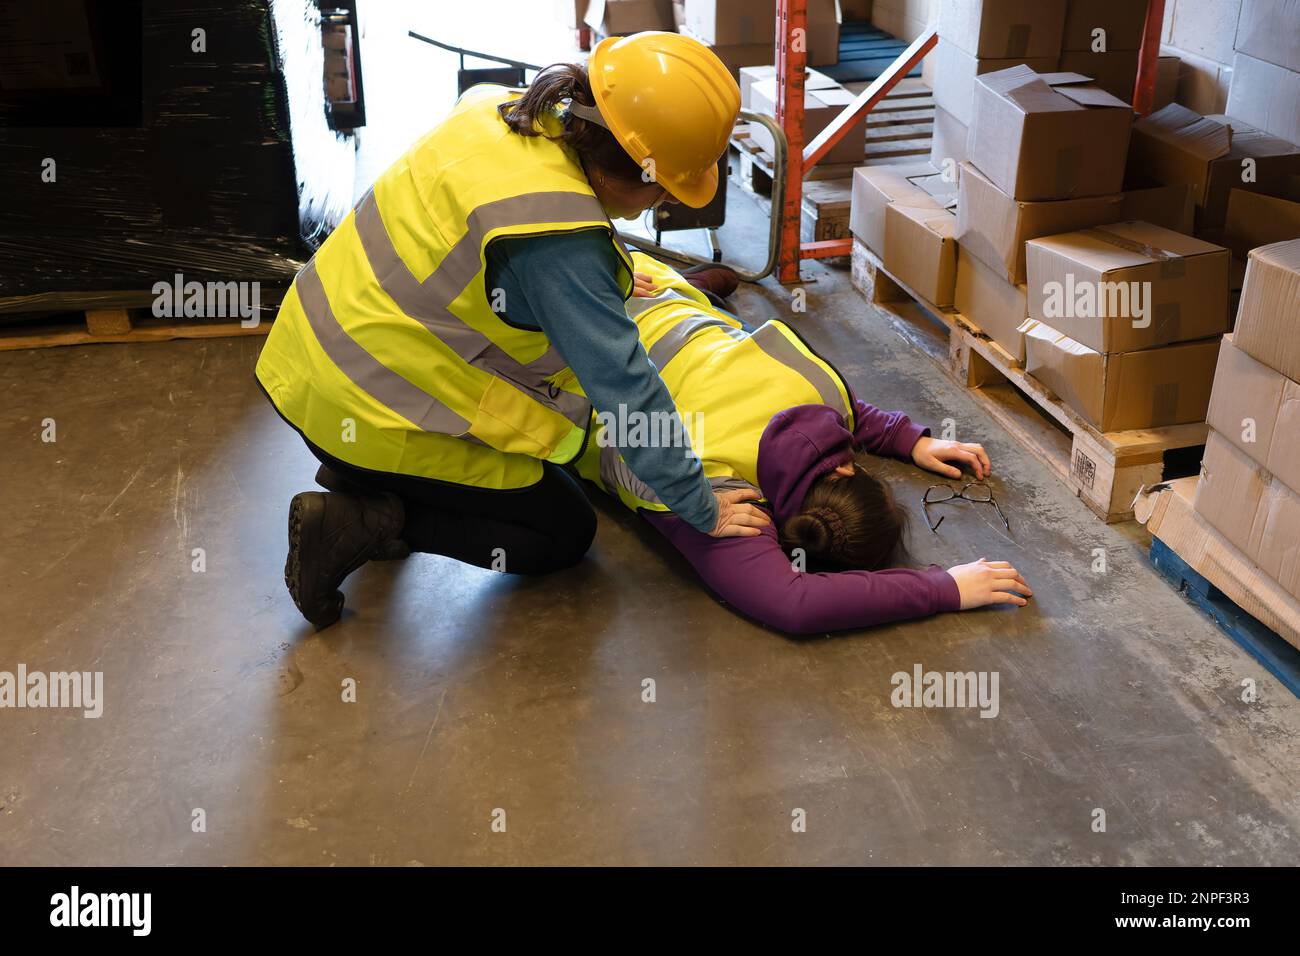 Accident in the work place ,young woman lies injured after falling from step ladder onto the factory floor second staff member assists Stock Photo